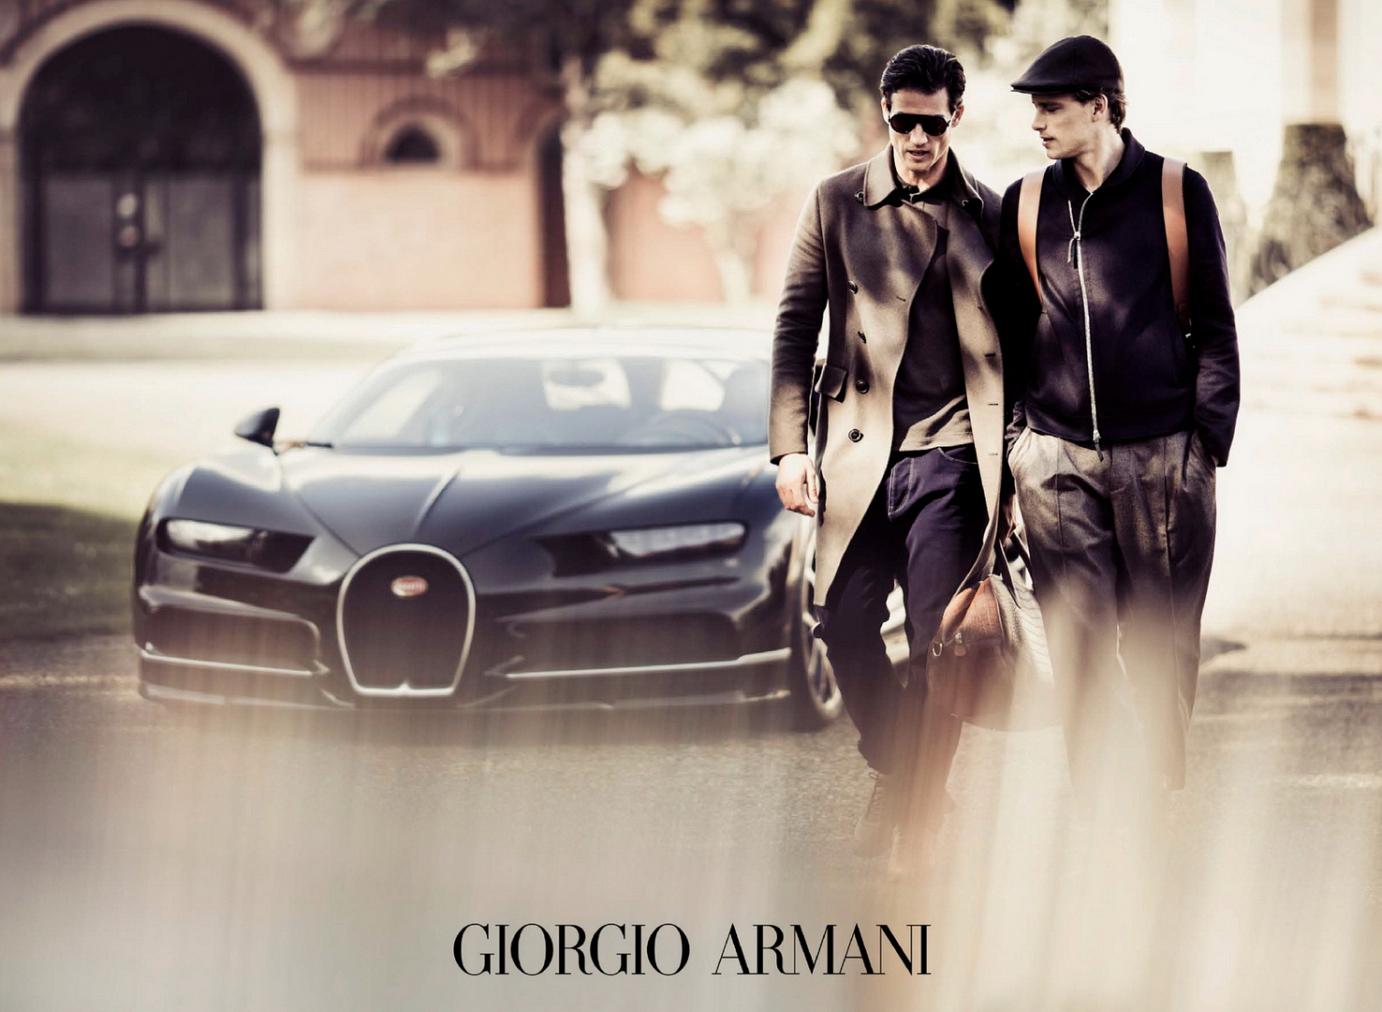 CoqCreative power by ProductionLink s.r.l. Bugatti-Wears-Giorgio-Armani Bugatti-Wears-Giorgio-Armani  Bugatti-Wears-Giorgio-Armani